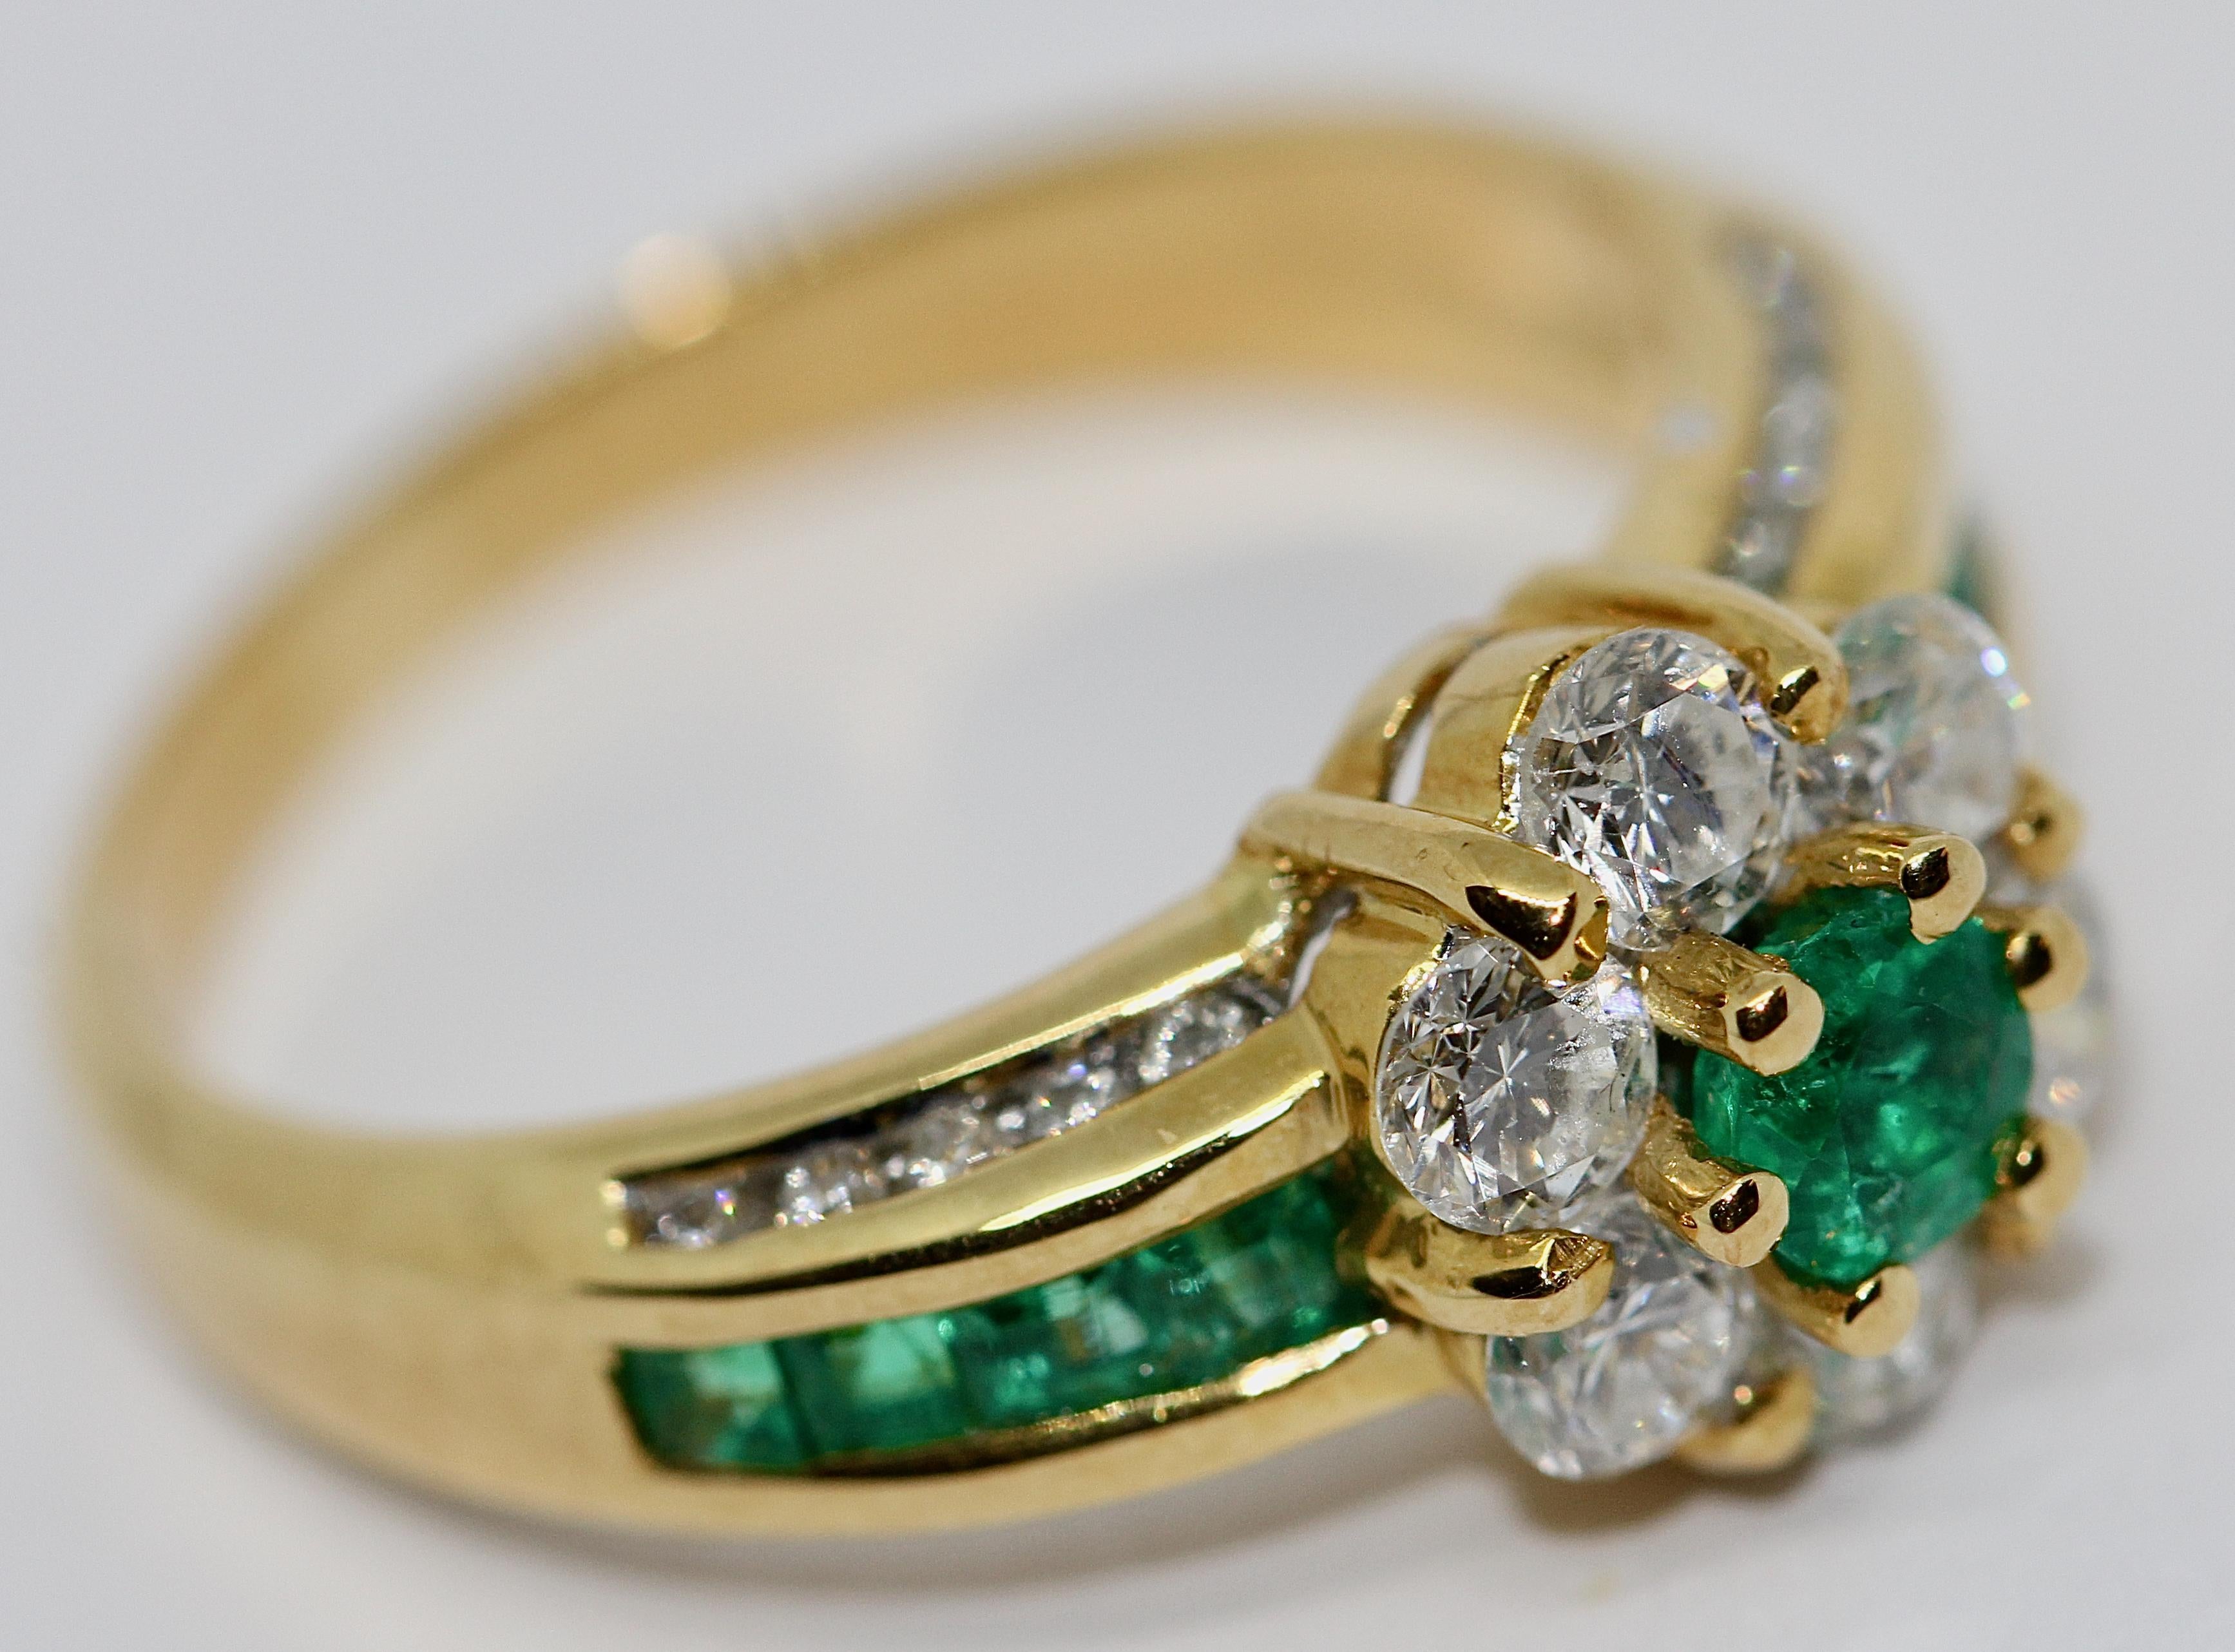 18 Karat Gold Ladies Ring Set with Diamonds and Emeralds, by Türler In Good Condition For Sale In Berlin, DE